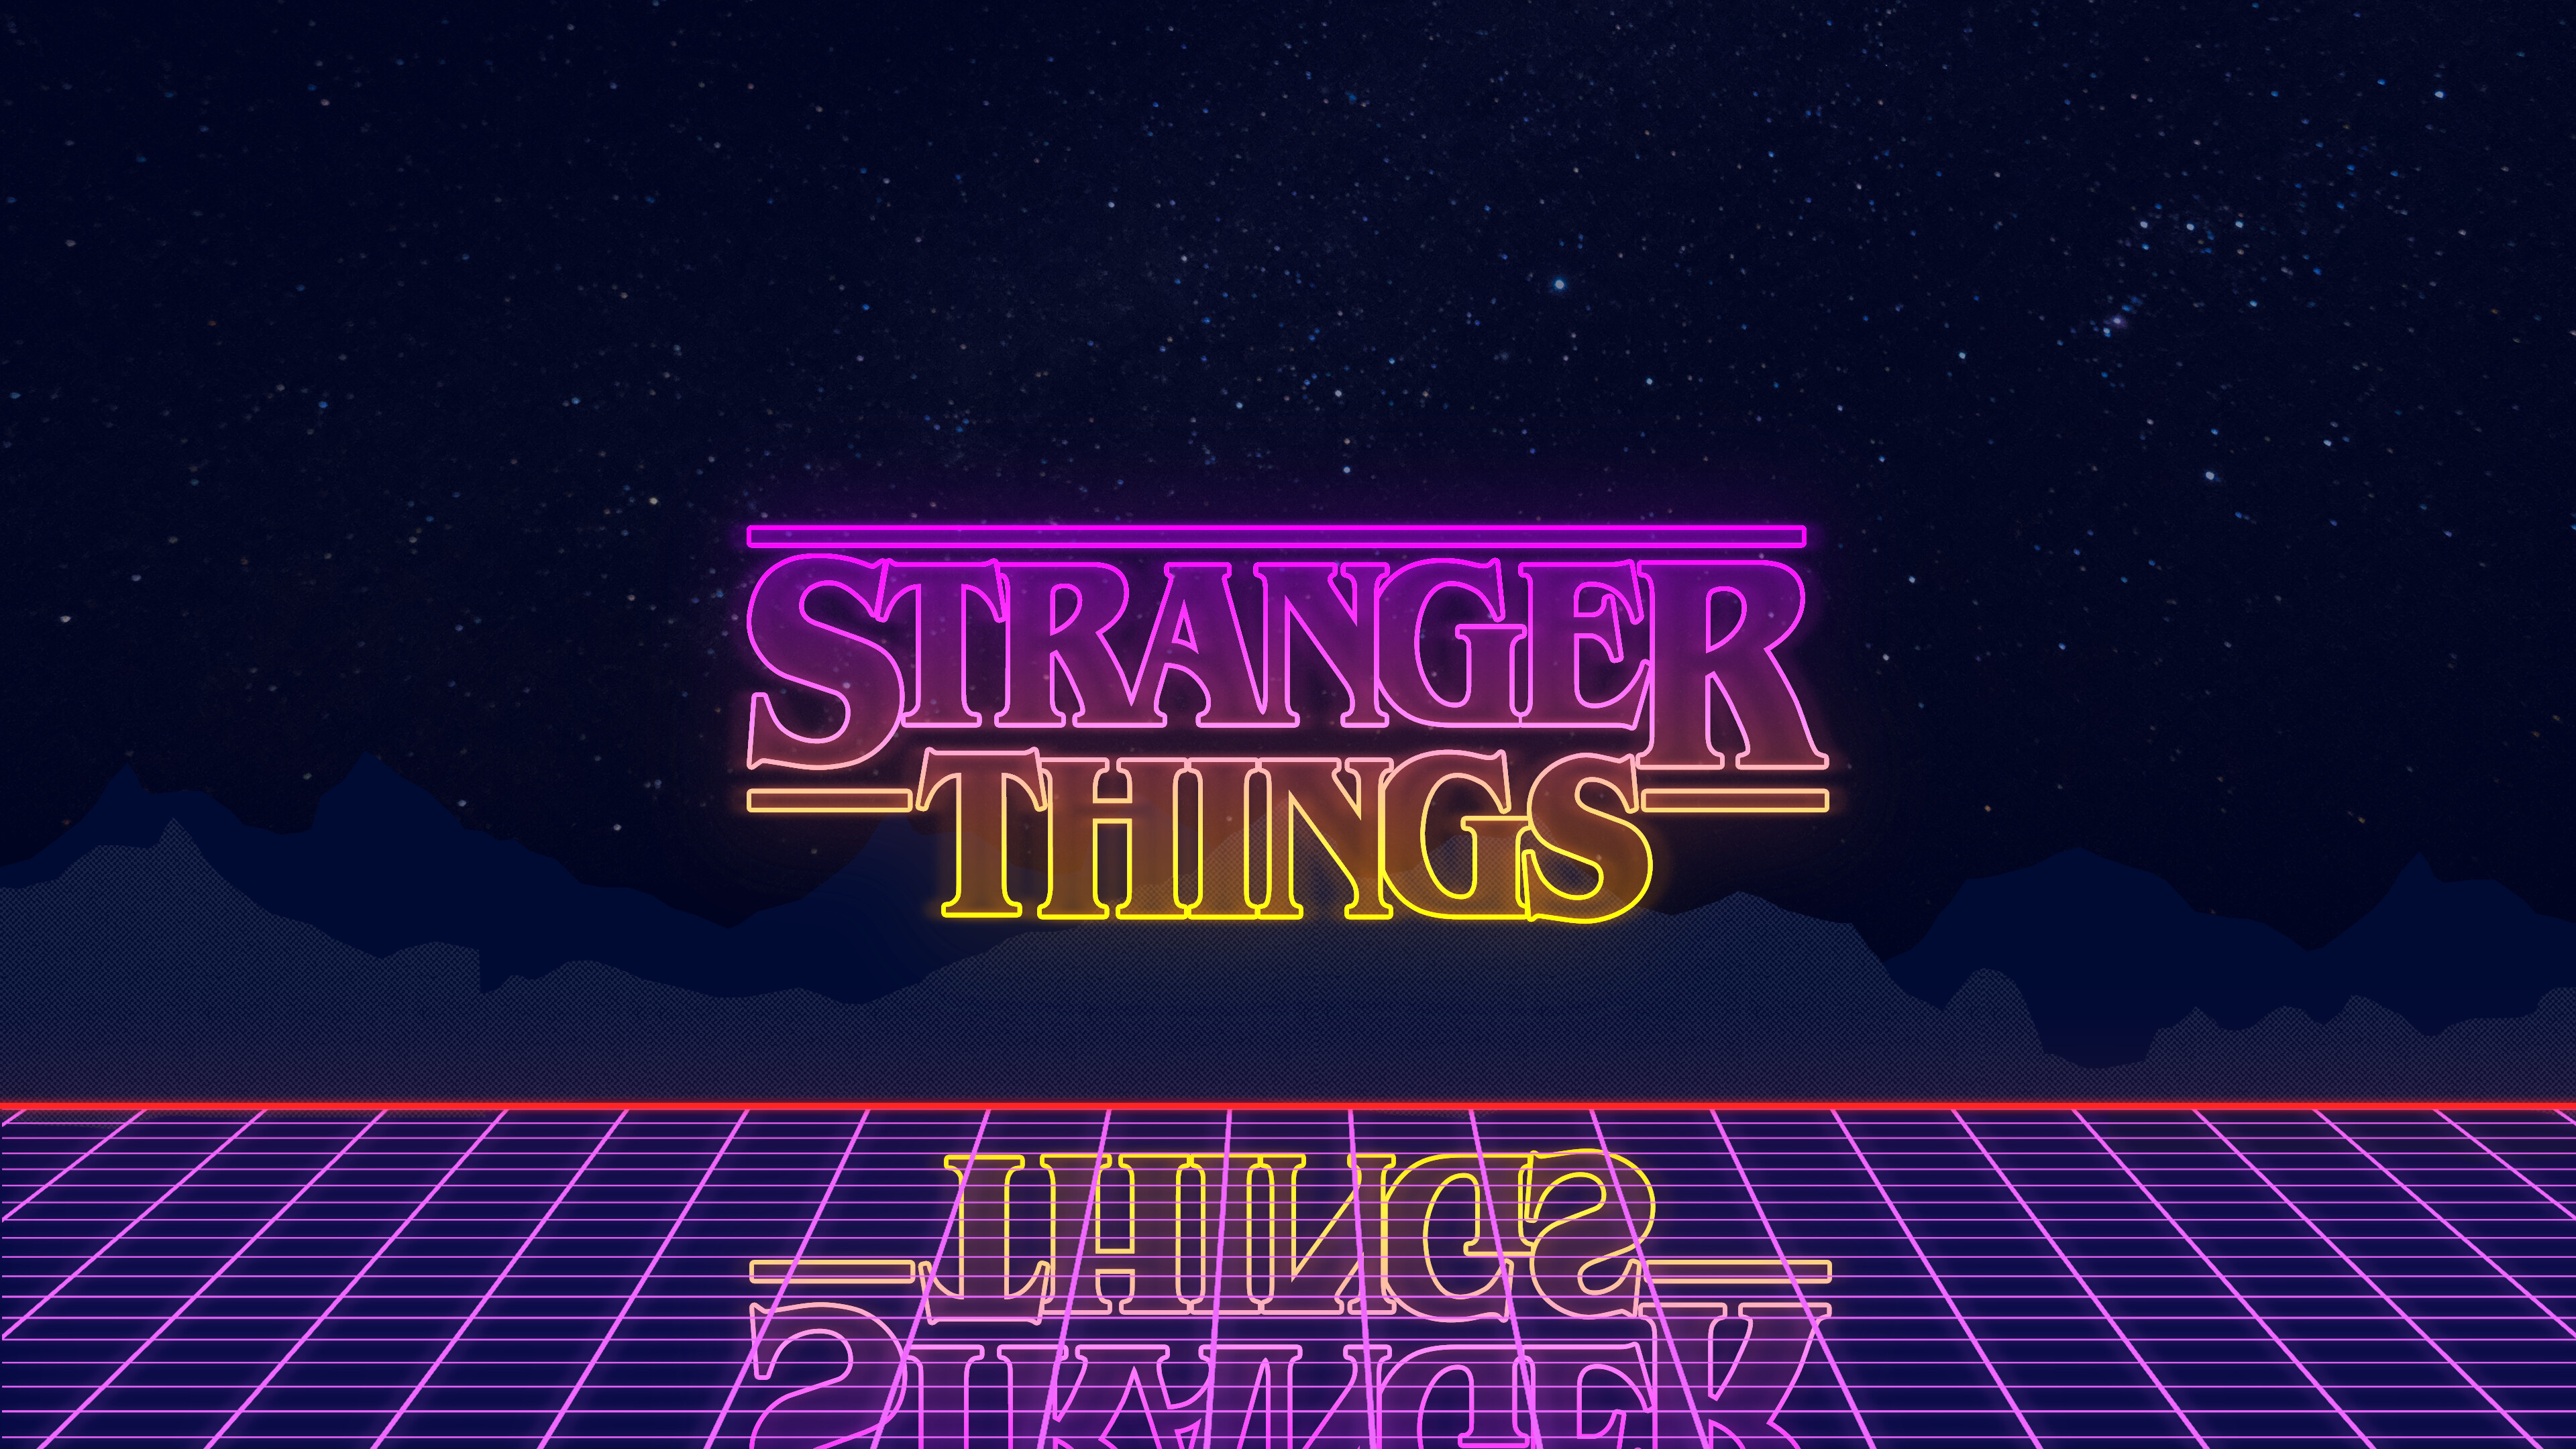 Stranger Things: The Duffer Brothers are executive producers along with Shawn Levy and Dan Cohen. 3840x2160 4K Wallpaper.